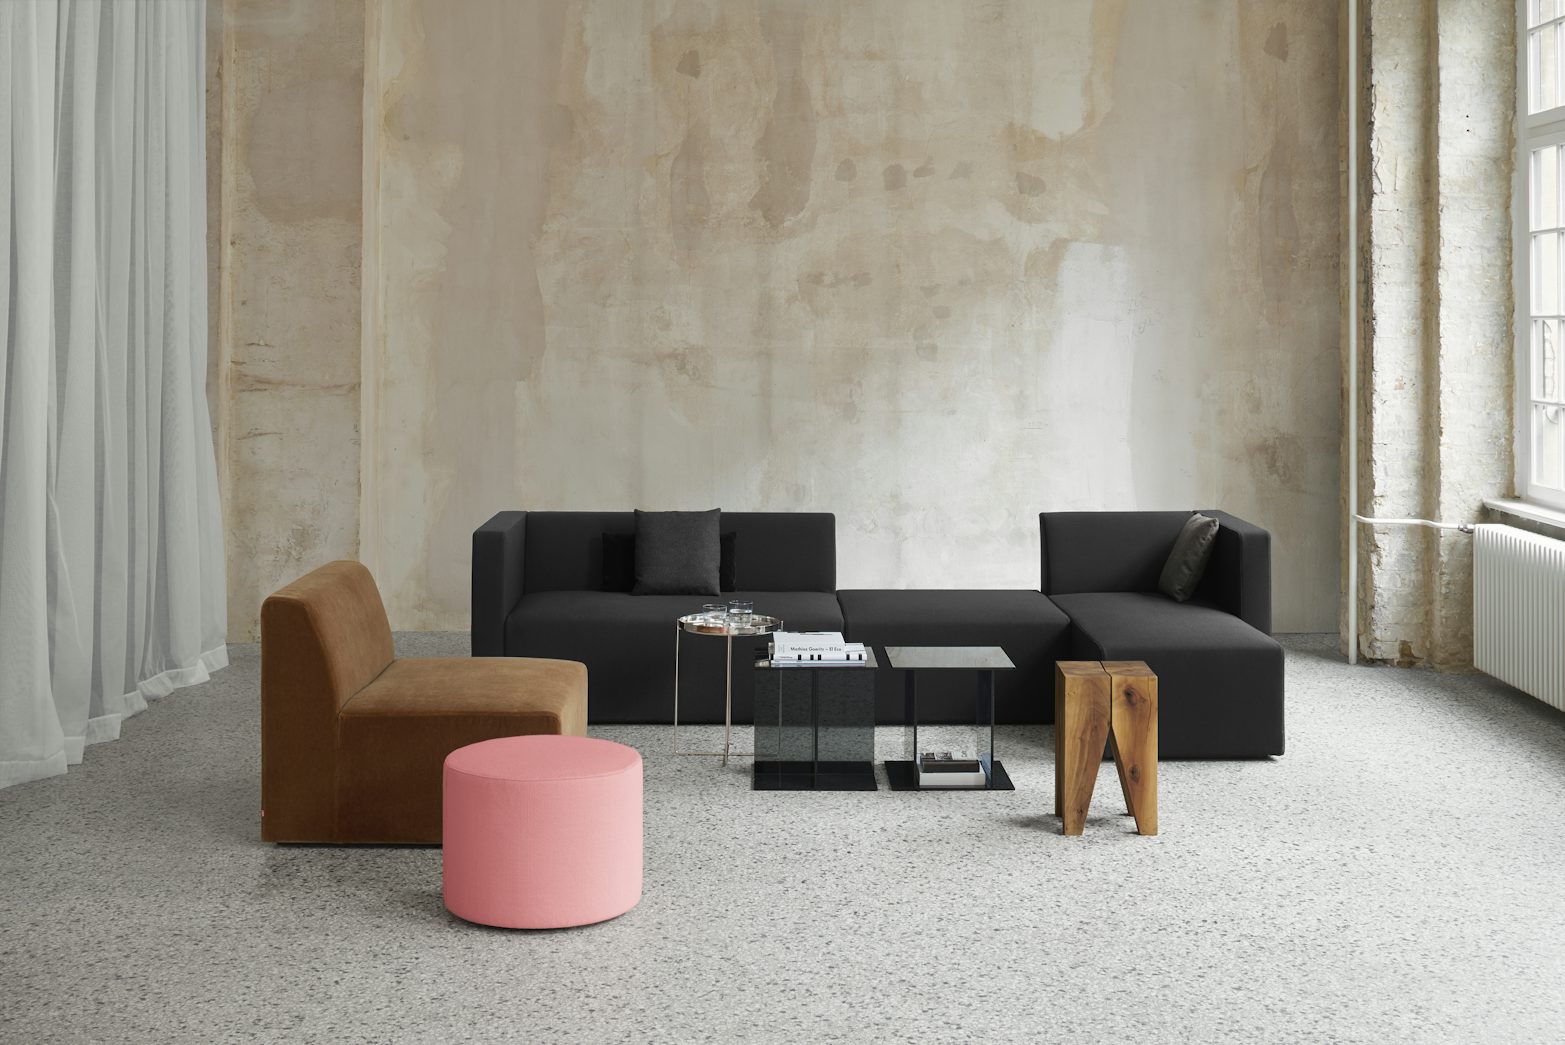 e15 vier side tables in smoke grey with kerman sofa and backenzahn stool